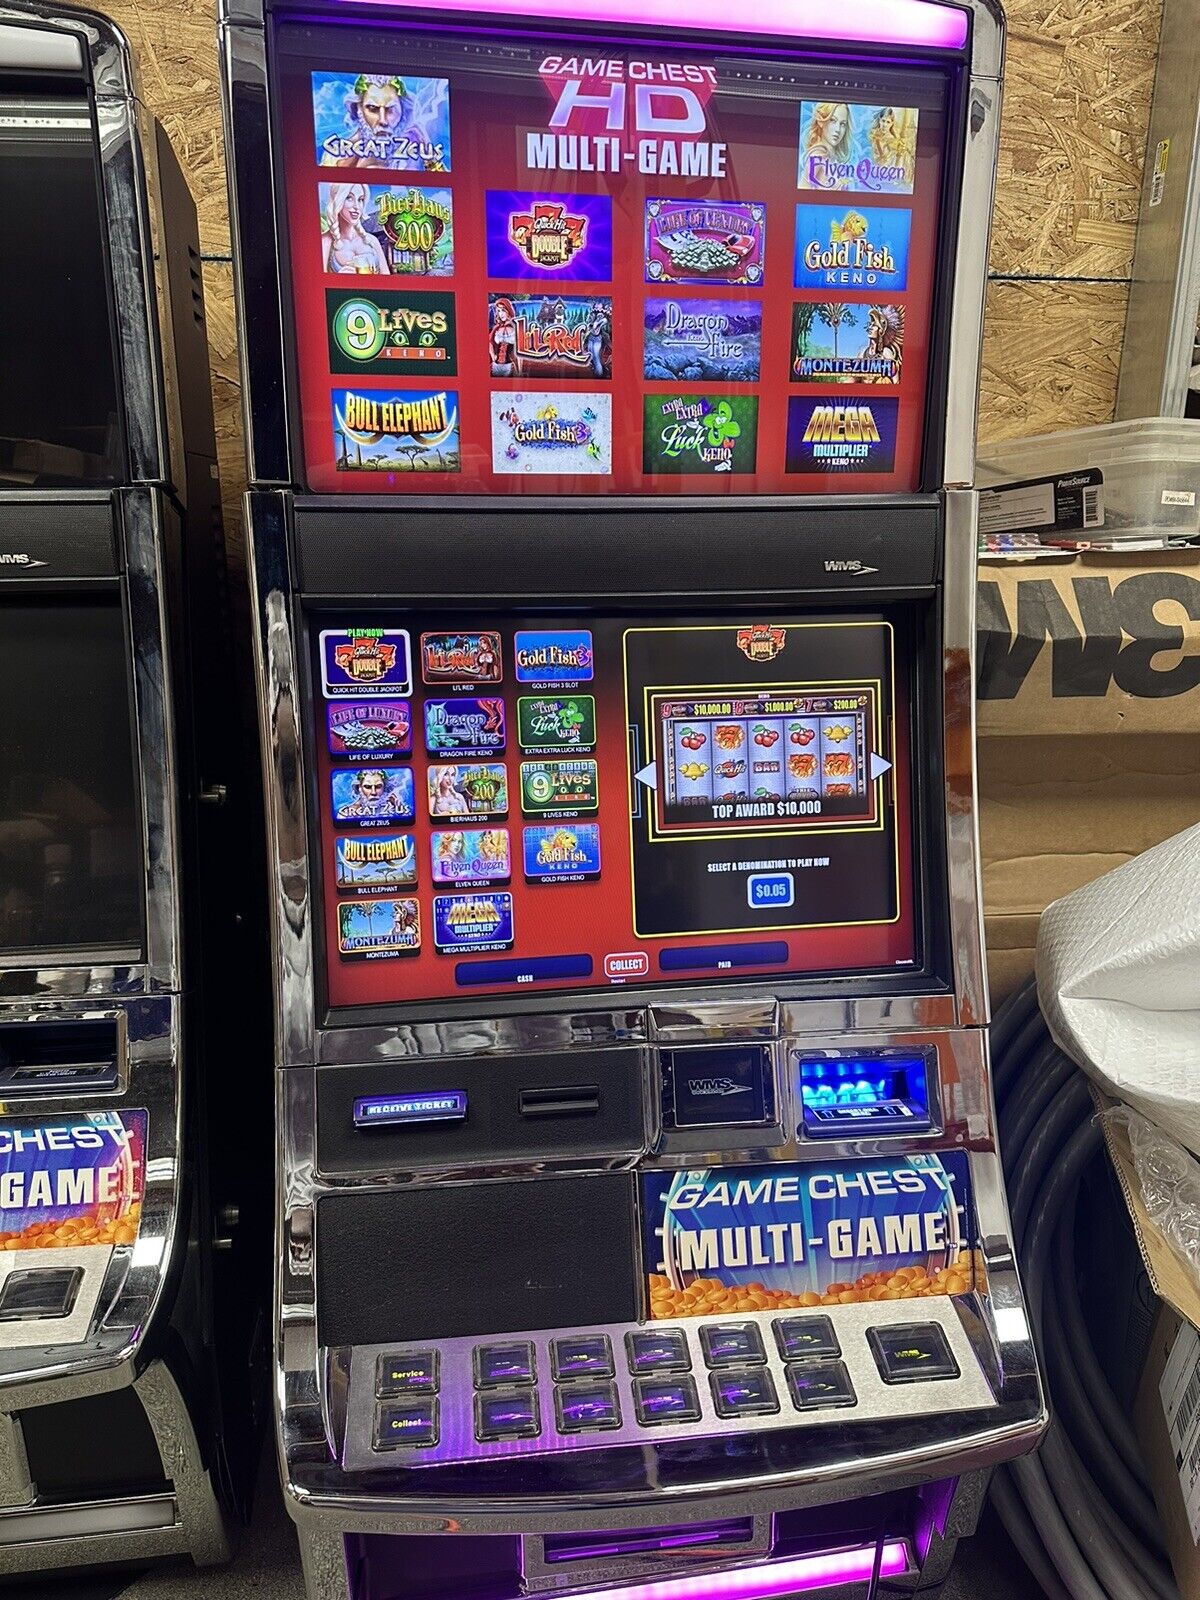 WMS BB3 HD MULTIGAME GAME CHEST  WV 14 SLOT MACHINE GAME SOFTWARE ONLY.